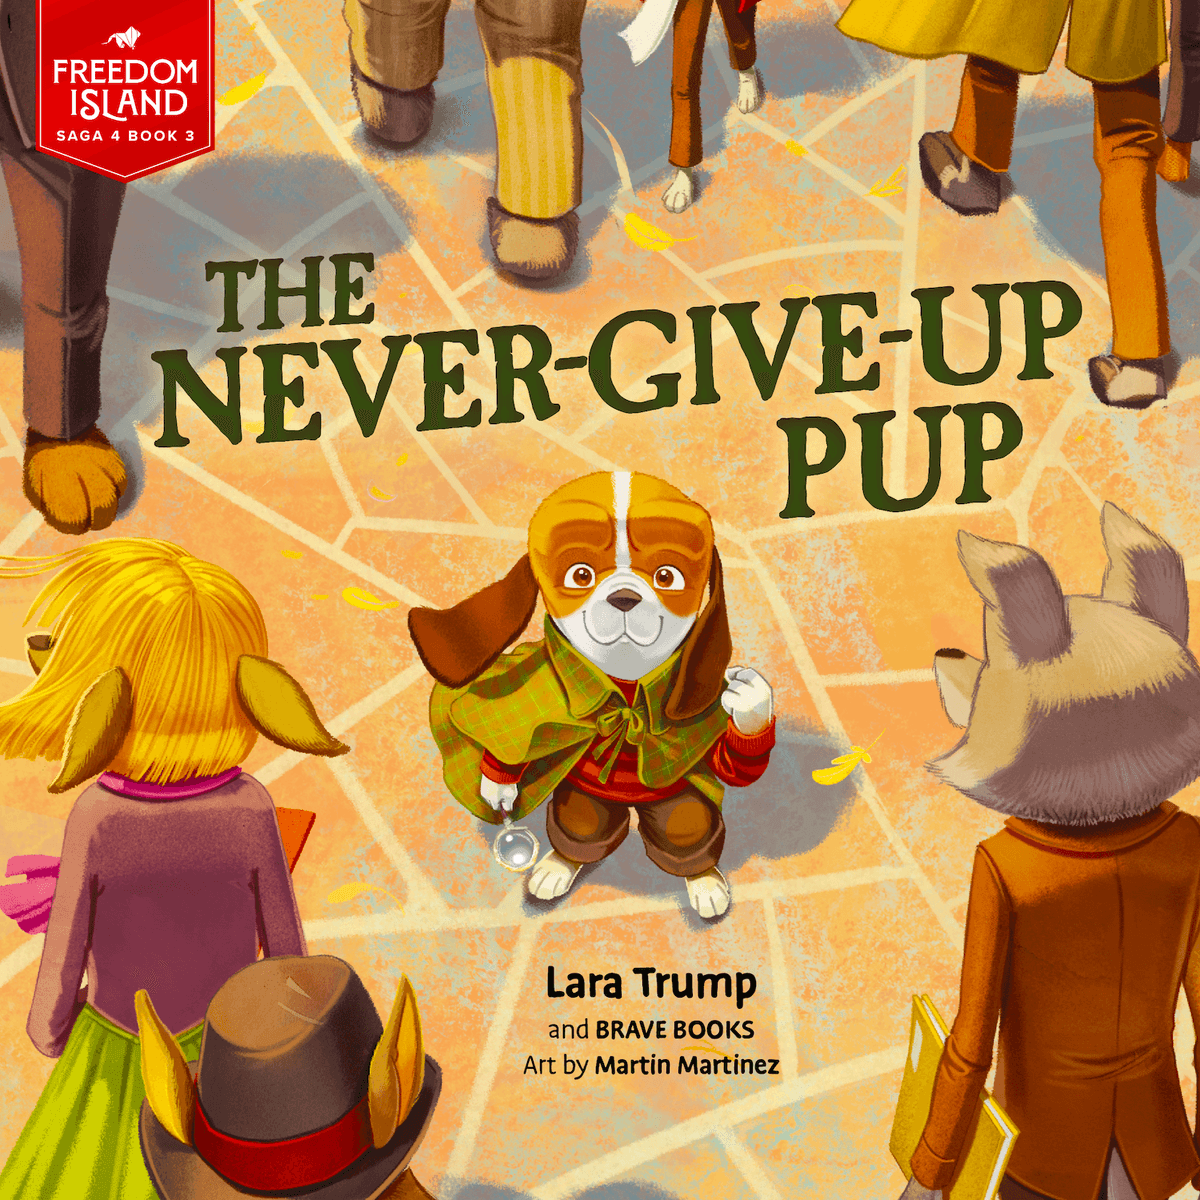 The cover of Lara Trump's new children's book, "The Never-Give-Up Pup." (Courtesy of Brave Books via Amplifi Agency)